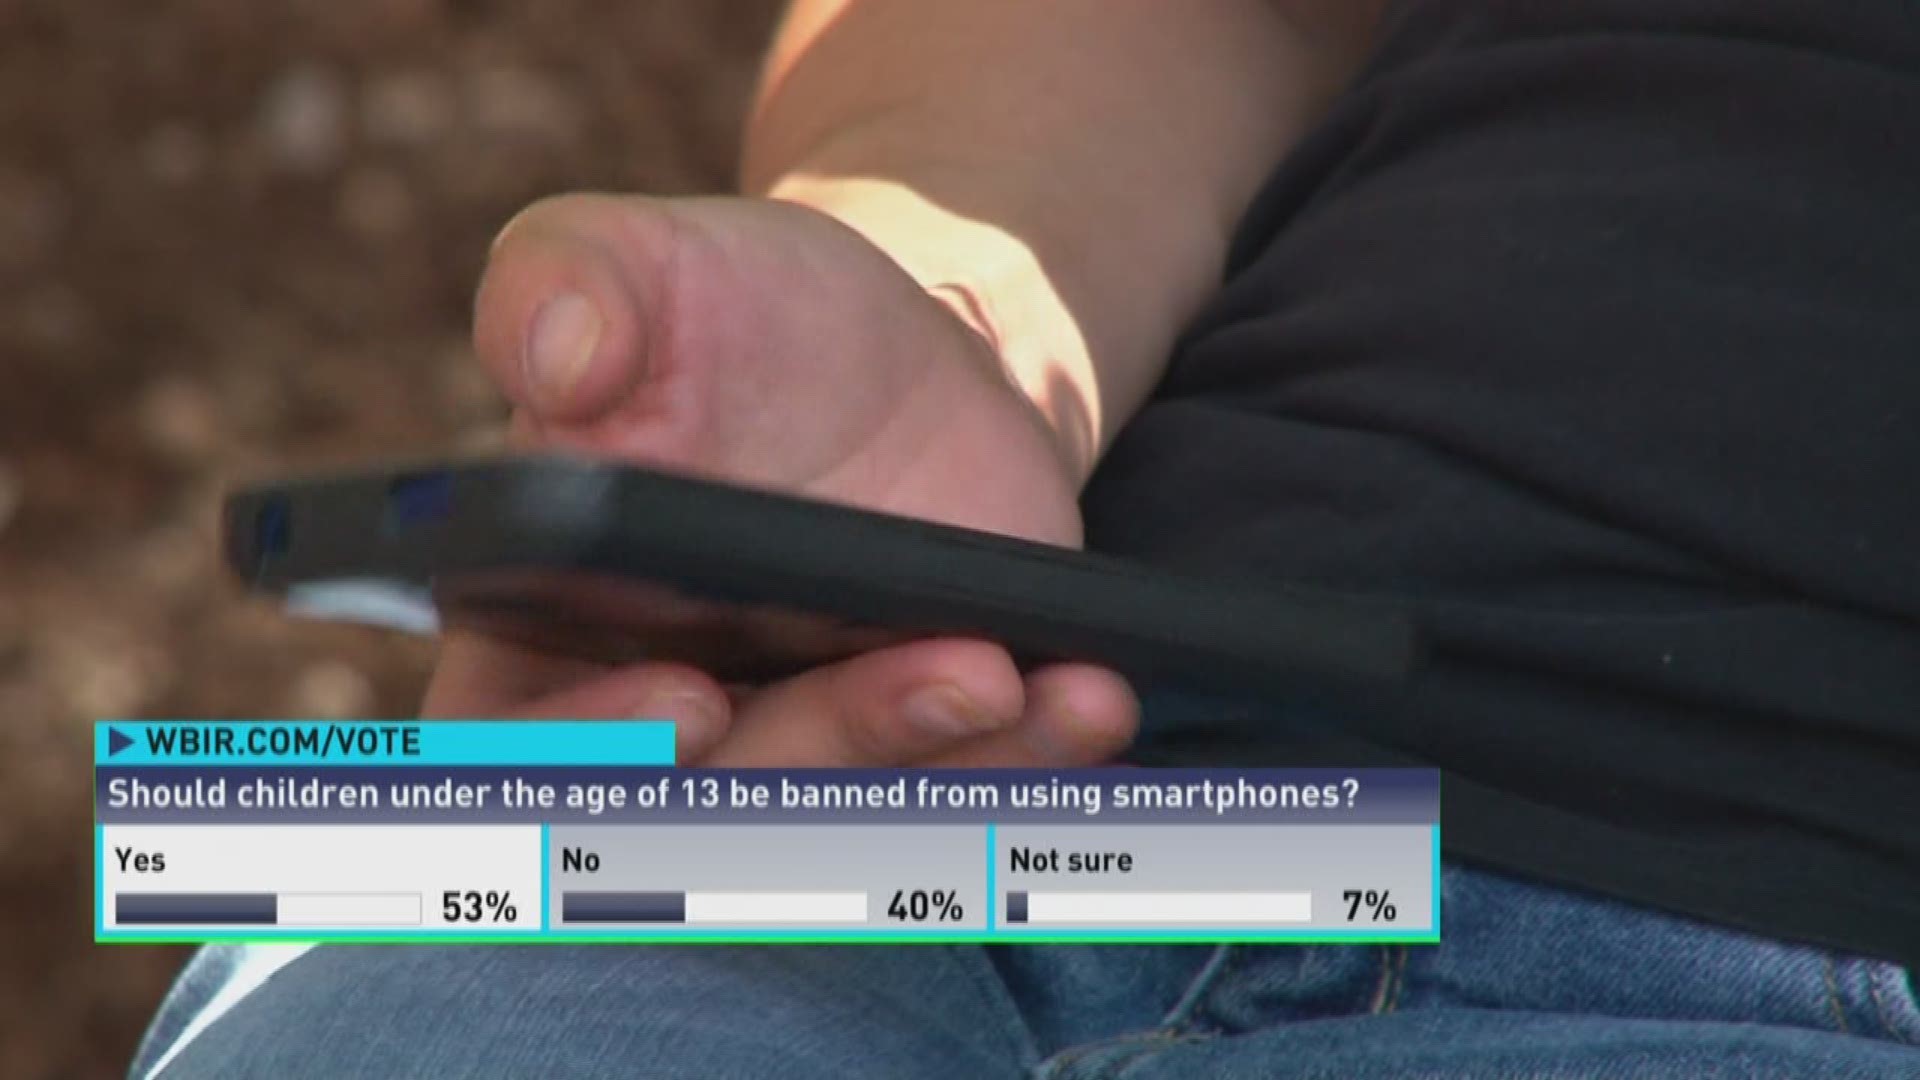 A Colorado doctor is pushing for children under the age of 13 to be banned from smartphones.